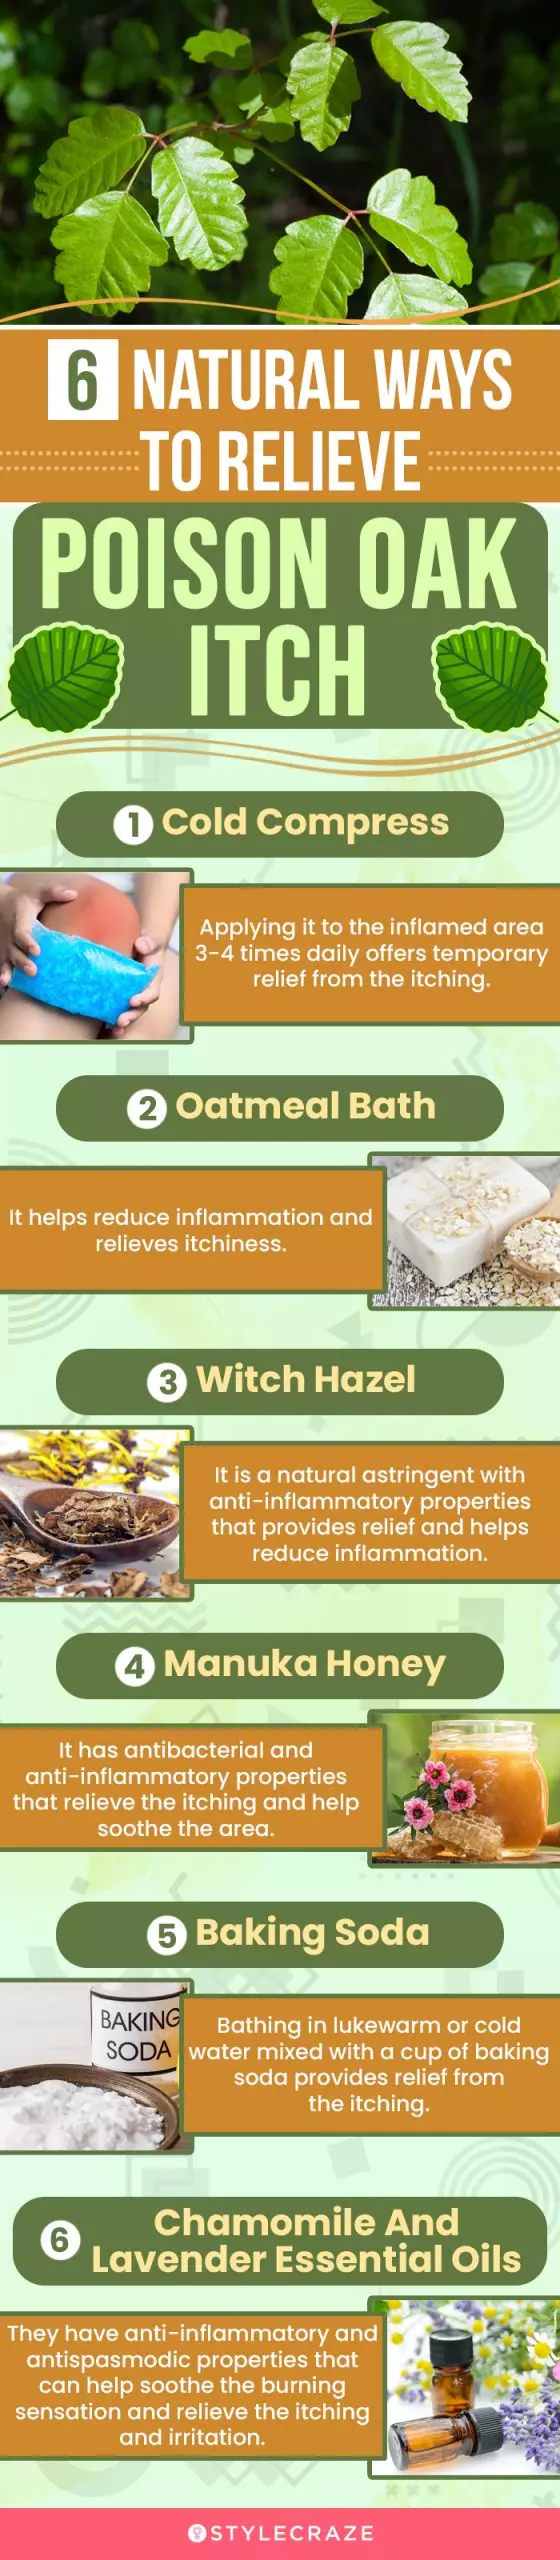 6 natural ways to relieve poison oak itch (infographic)